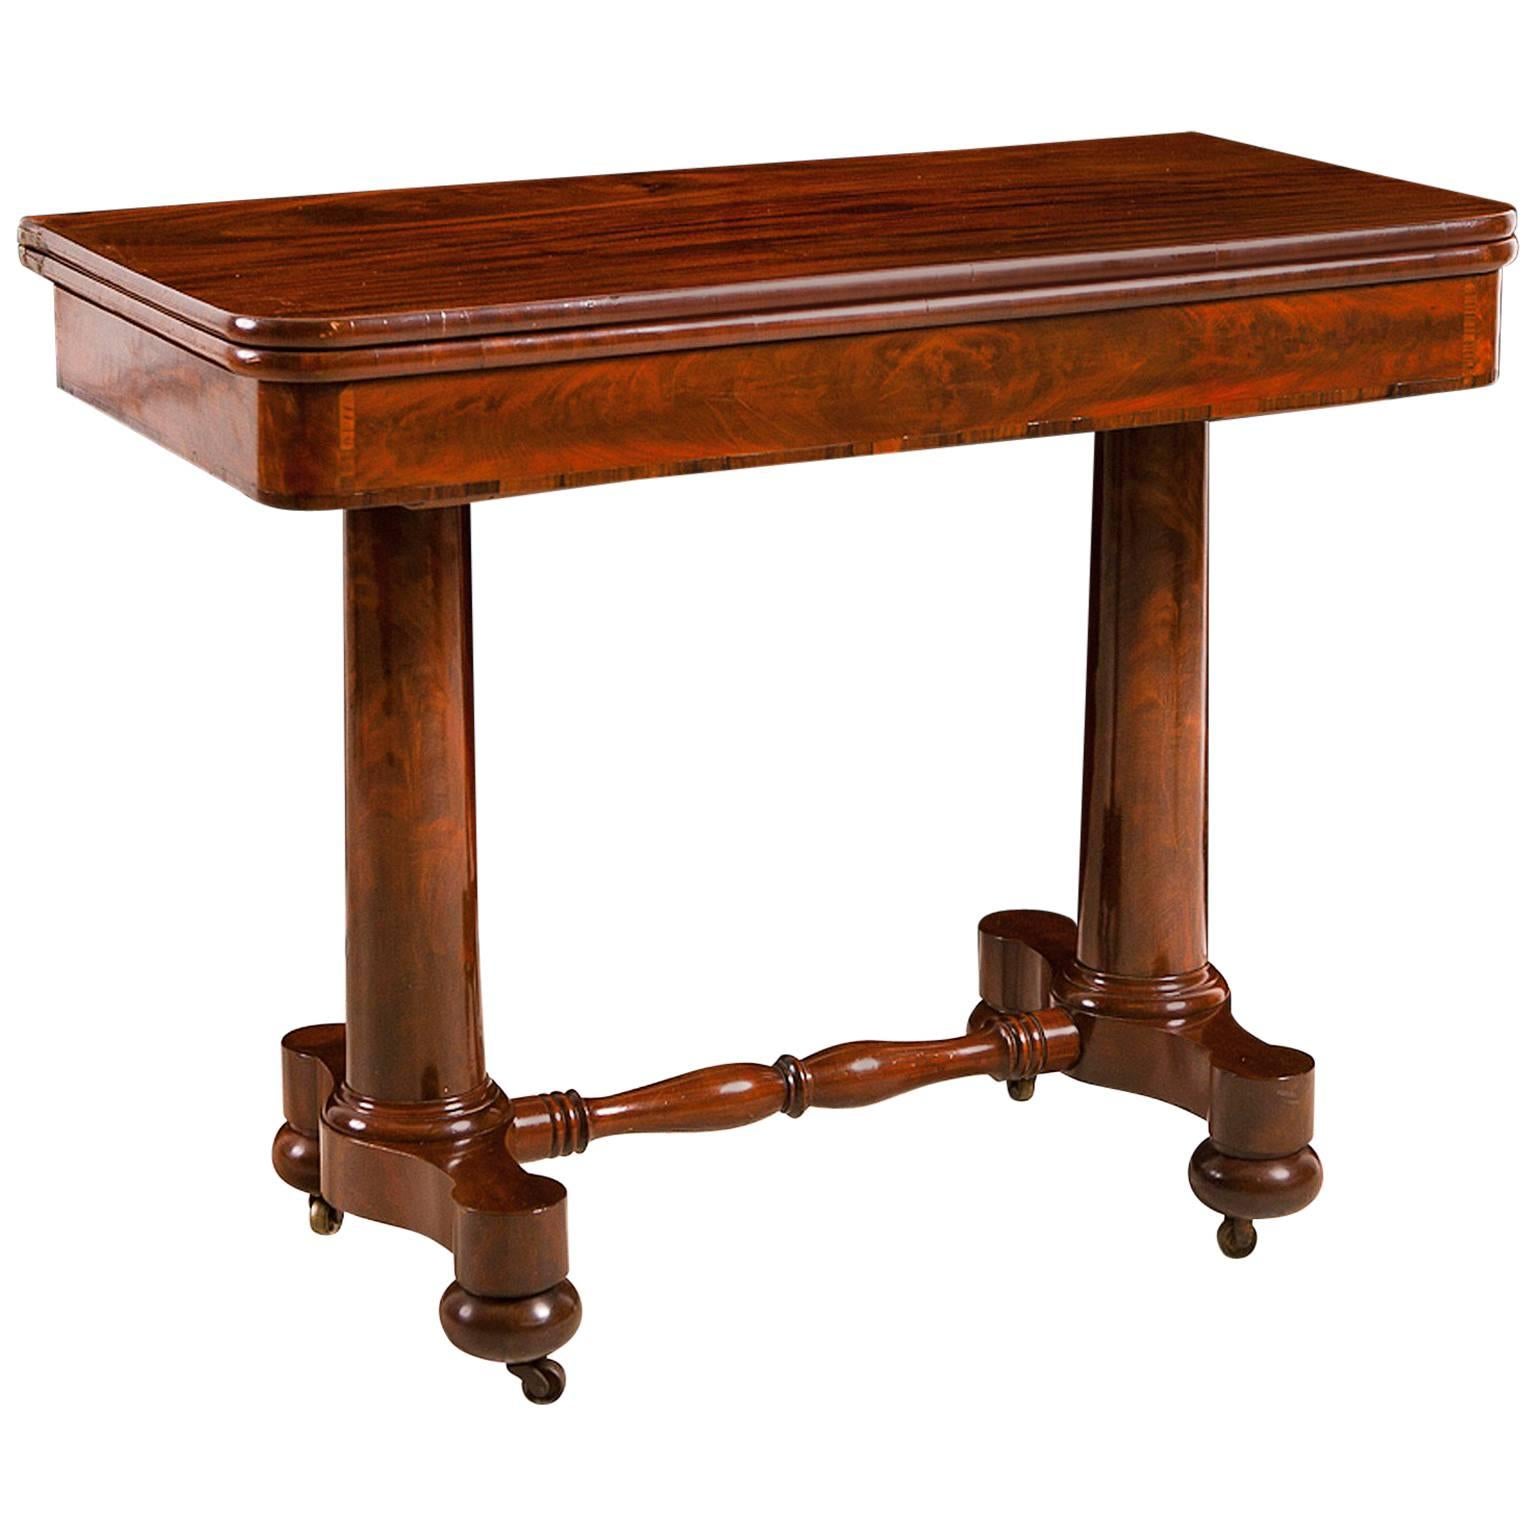 New York Empire Games Table Attributable to Meeks and Sons, circa 1830